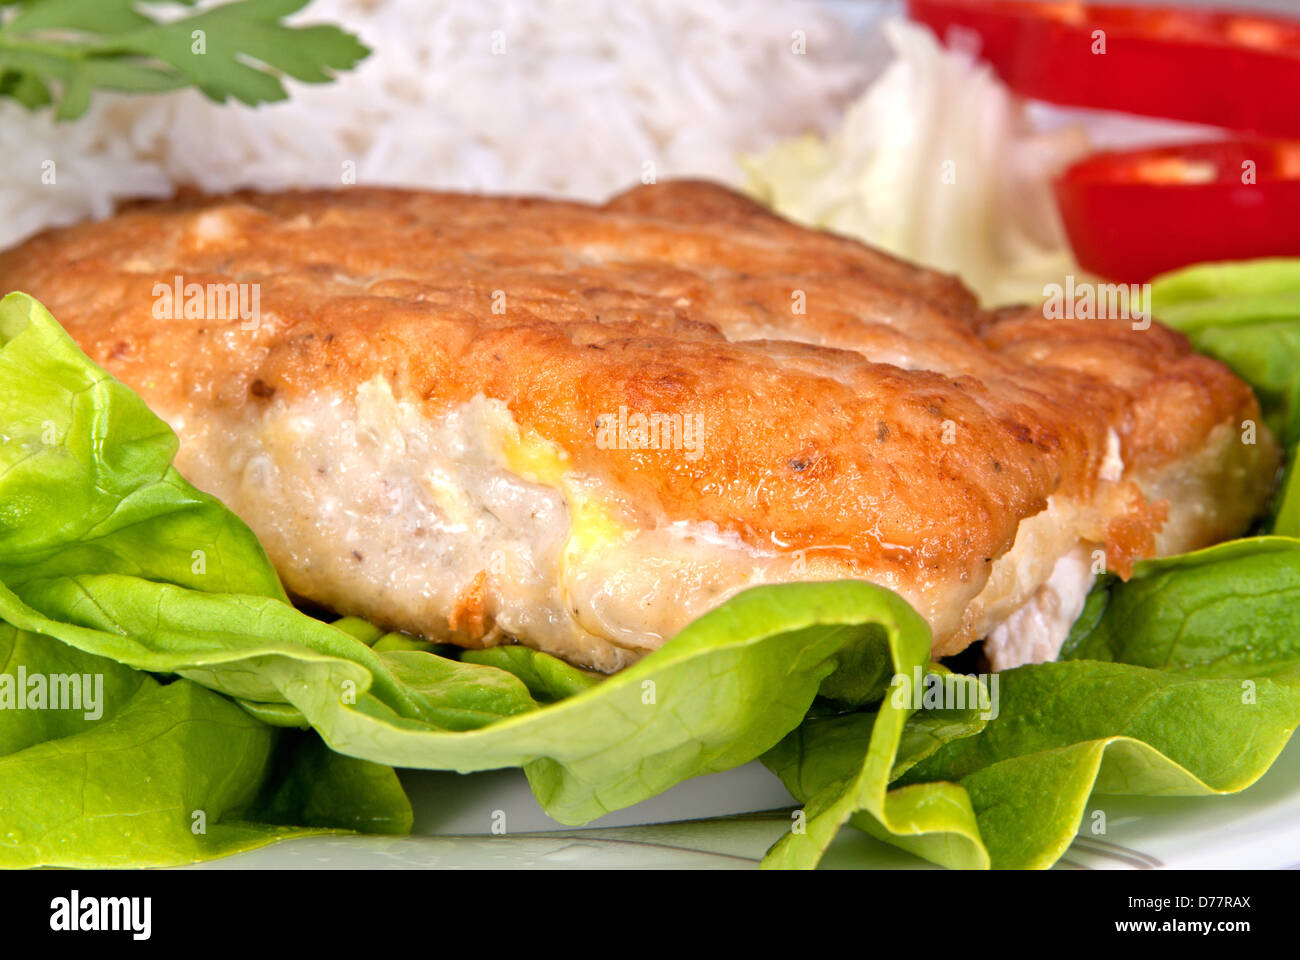 Fried chicken chop with rice and vegetables Stock Photo